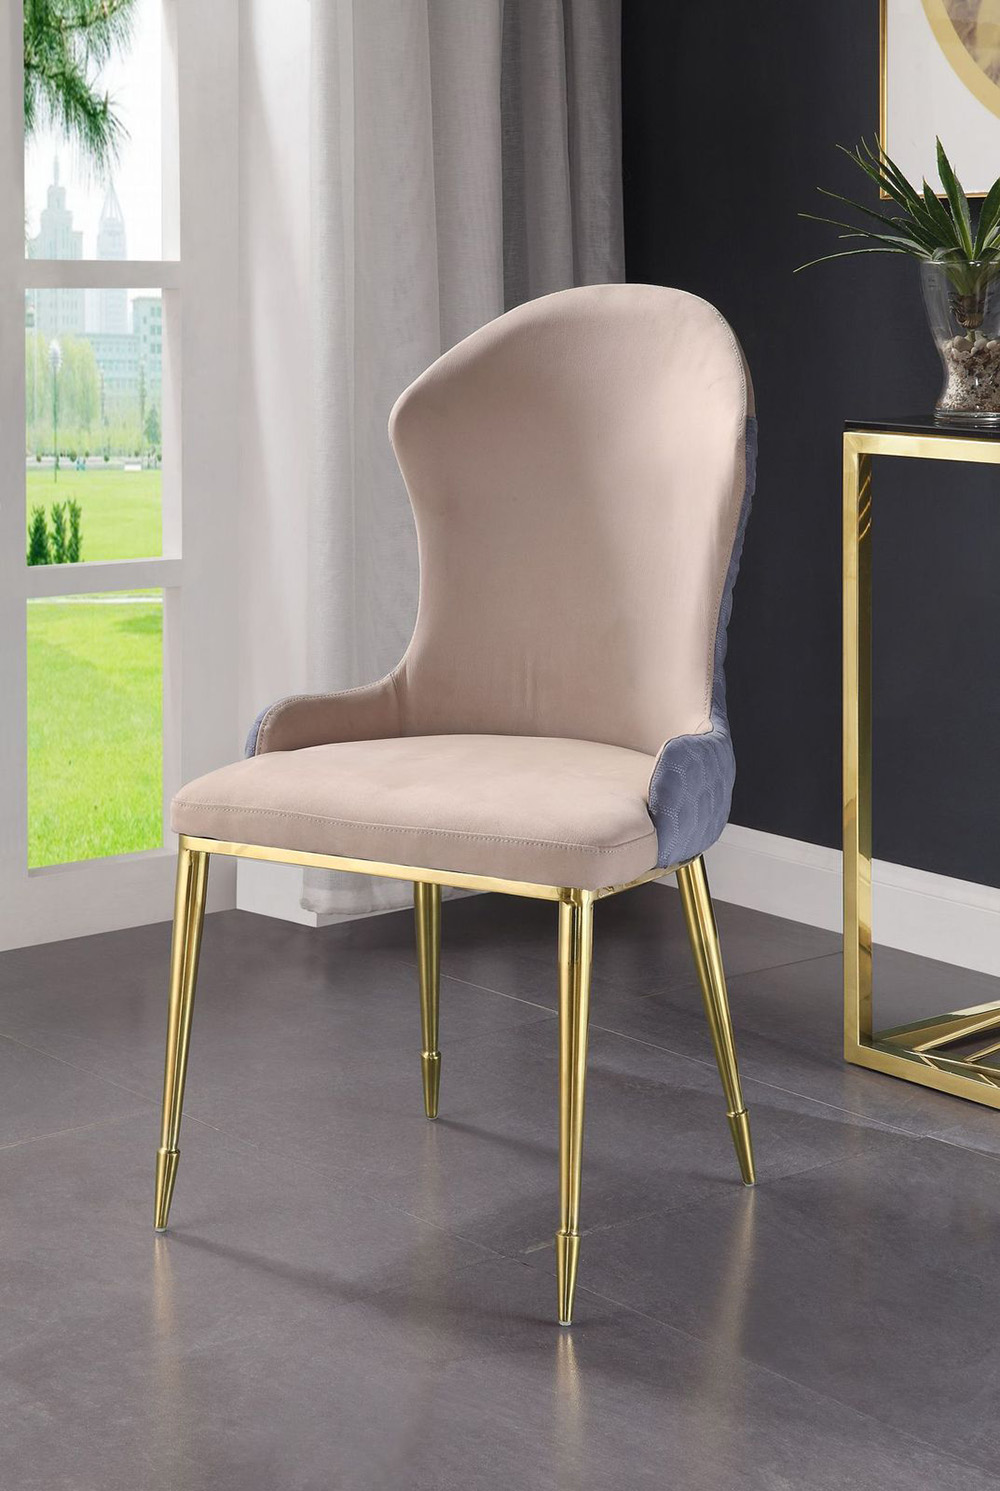 ACME Caolan Fabric Upholstered Dining Chair Set of 2, with Curved Backrest, and Metal Legs, for Restaurant, Cafe, Tavern, Office, Living Room - Beige